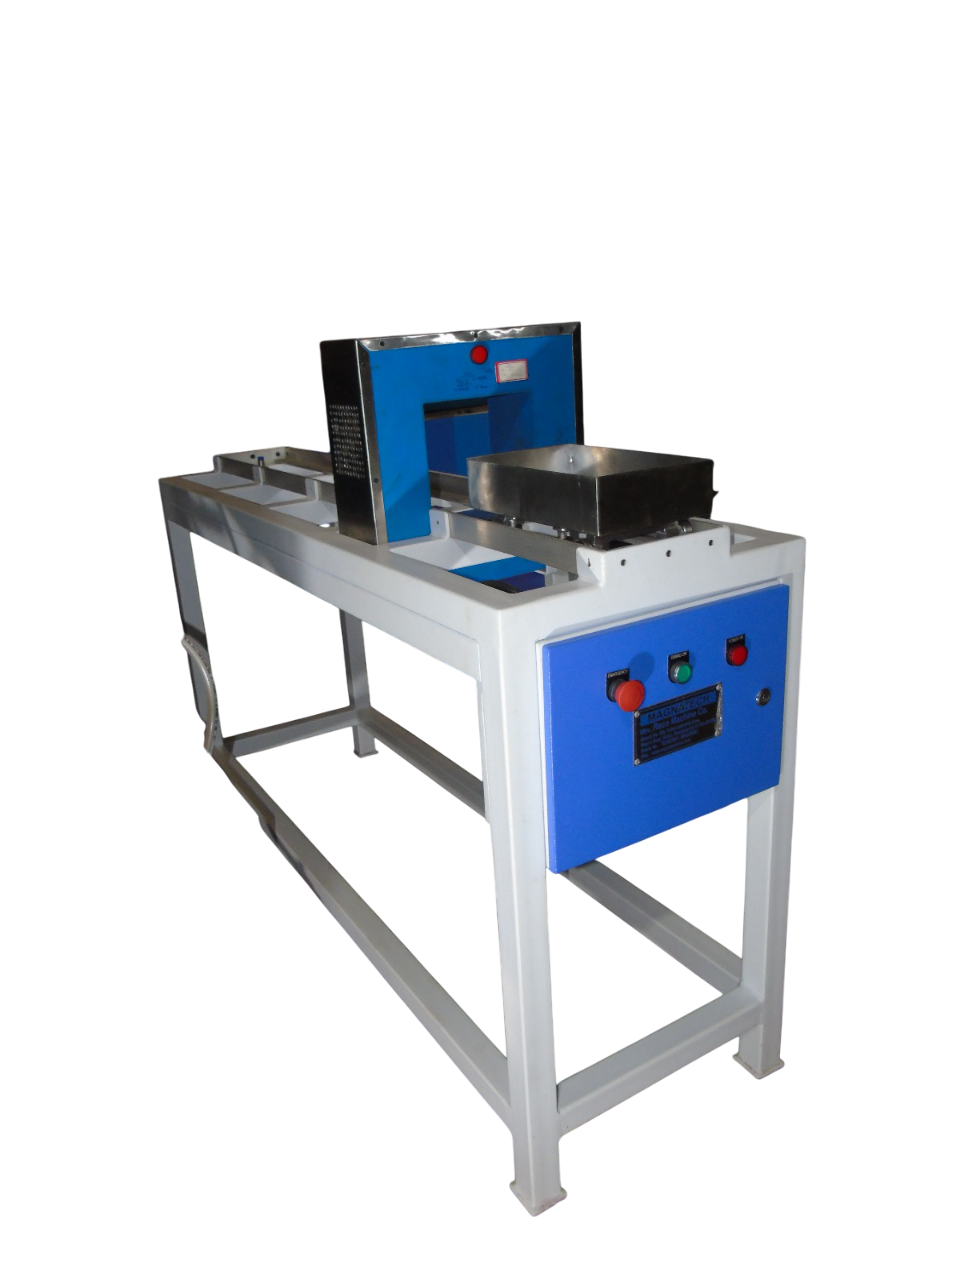 Magnetic Particle Inspection Machine - HMI based